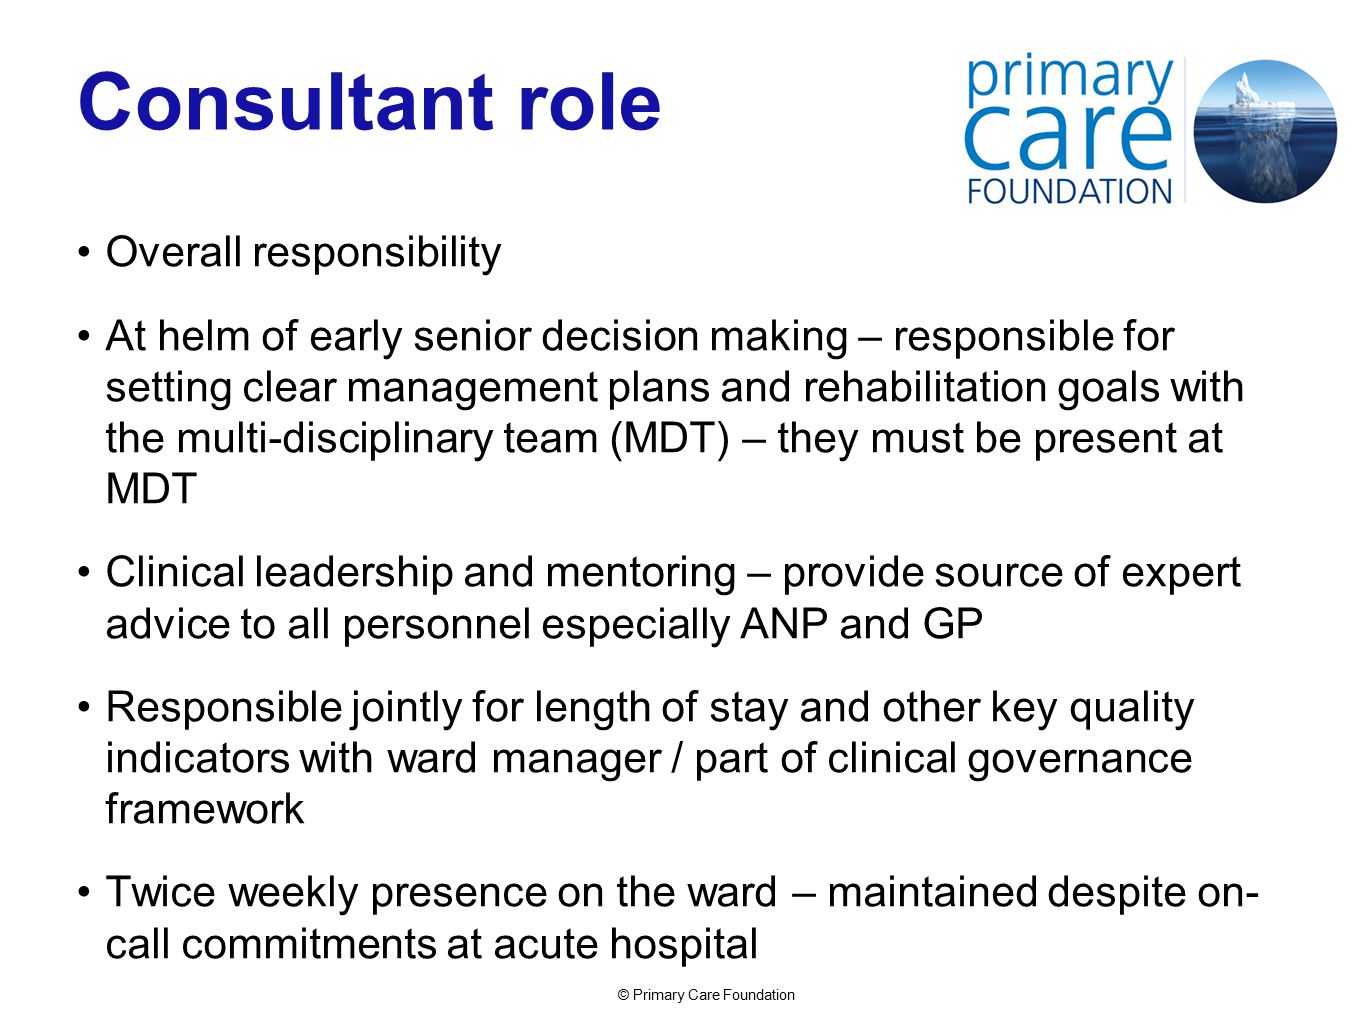 © Primary Care Foundation Consultant role Overall responsibility At helm of early senior decision making – responsible for setting clear management plans and rehabilitation goals with the multi-disciplinary team (MDT) – they must be present at MDT Clinical leadership and mentoring – provide source of expert advice to all personnel especially ANP and GP Responsible jointly for length of stay and other key quality indicators with ward manager / part of clinical governance framework Twice weekly presence on the ward – maintained despite on- call commitments at acute hospital